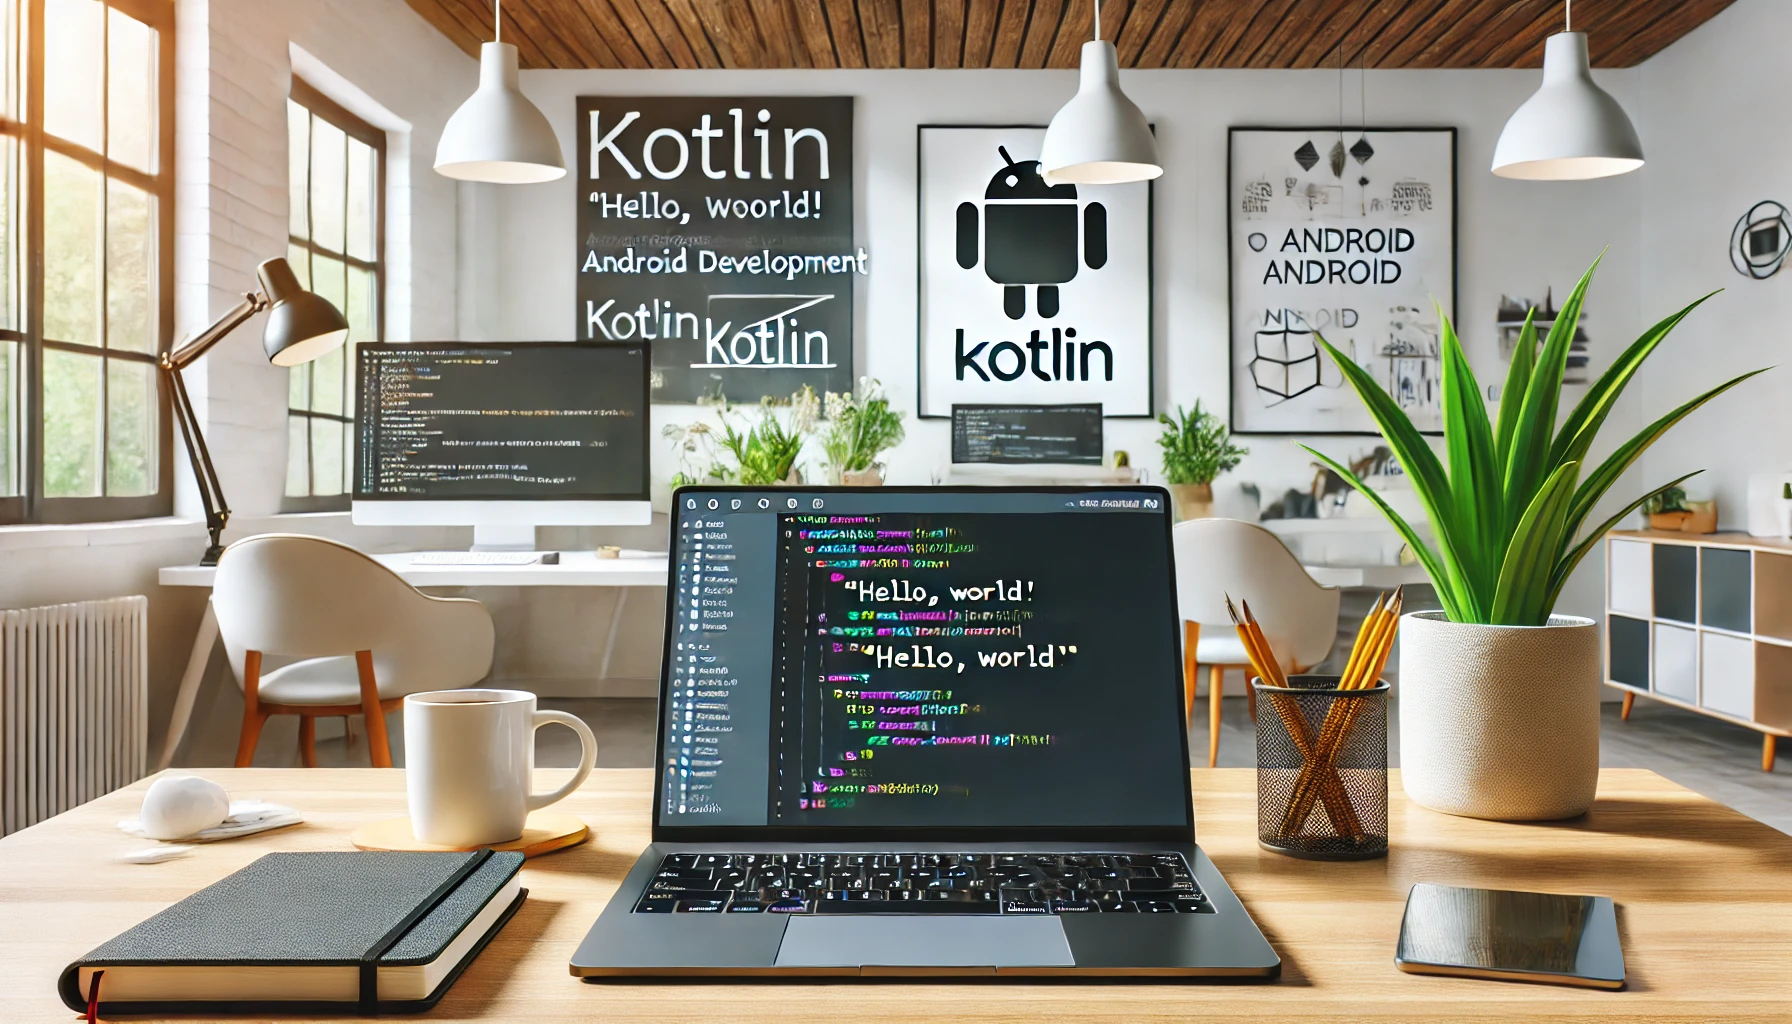 Kotlin is a powerful, modern programming language that has gained popularity among Android developers. In this beginner's guide, we'll explore its features, advantages, and provide simple examples to help you get started with Kotlin.